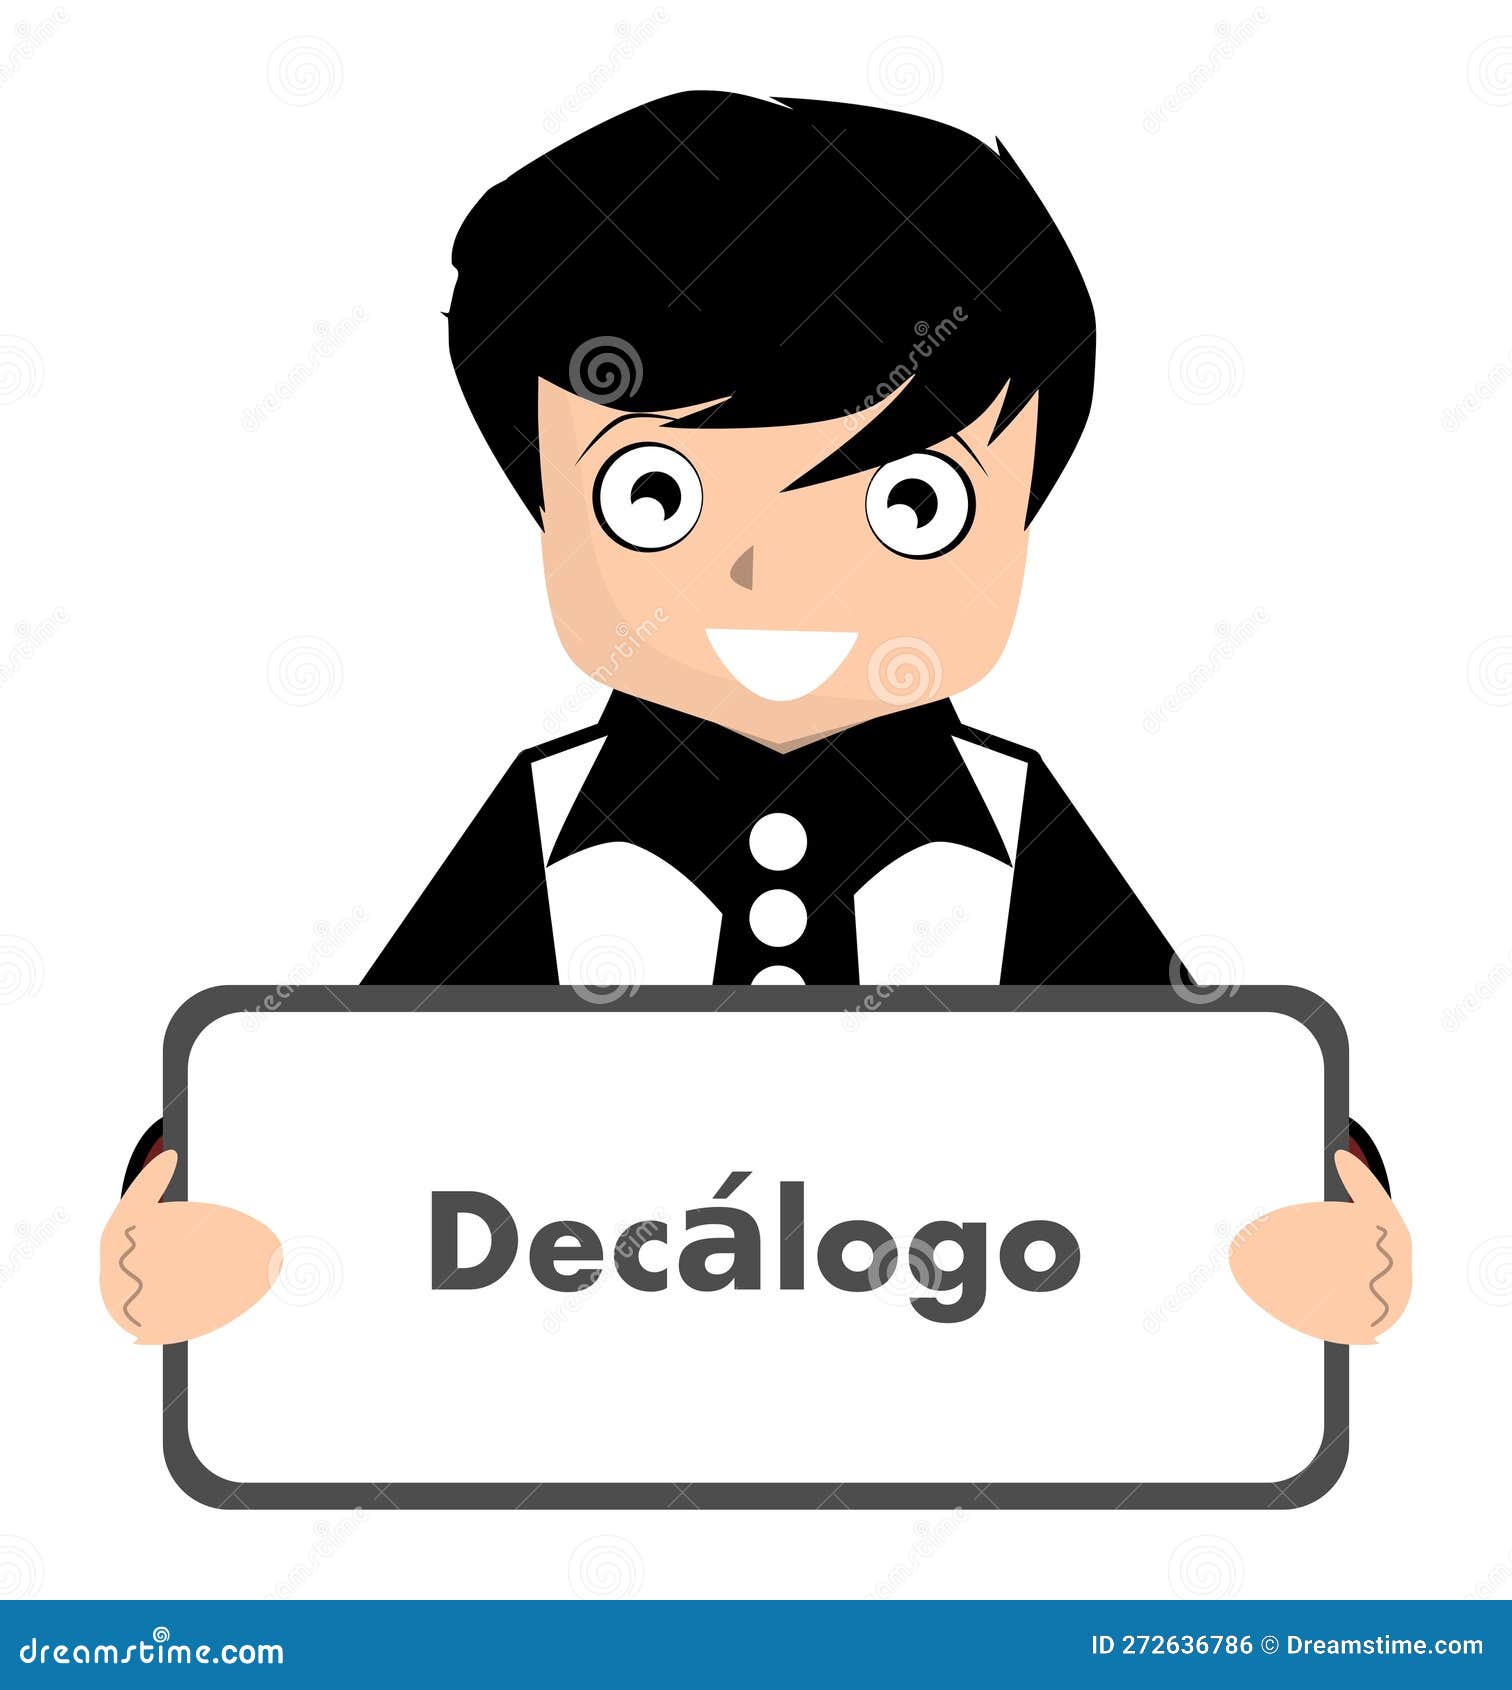 boy with decalogue sign, spanish and portuguese, rules, .